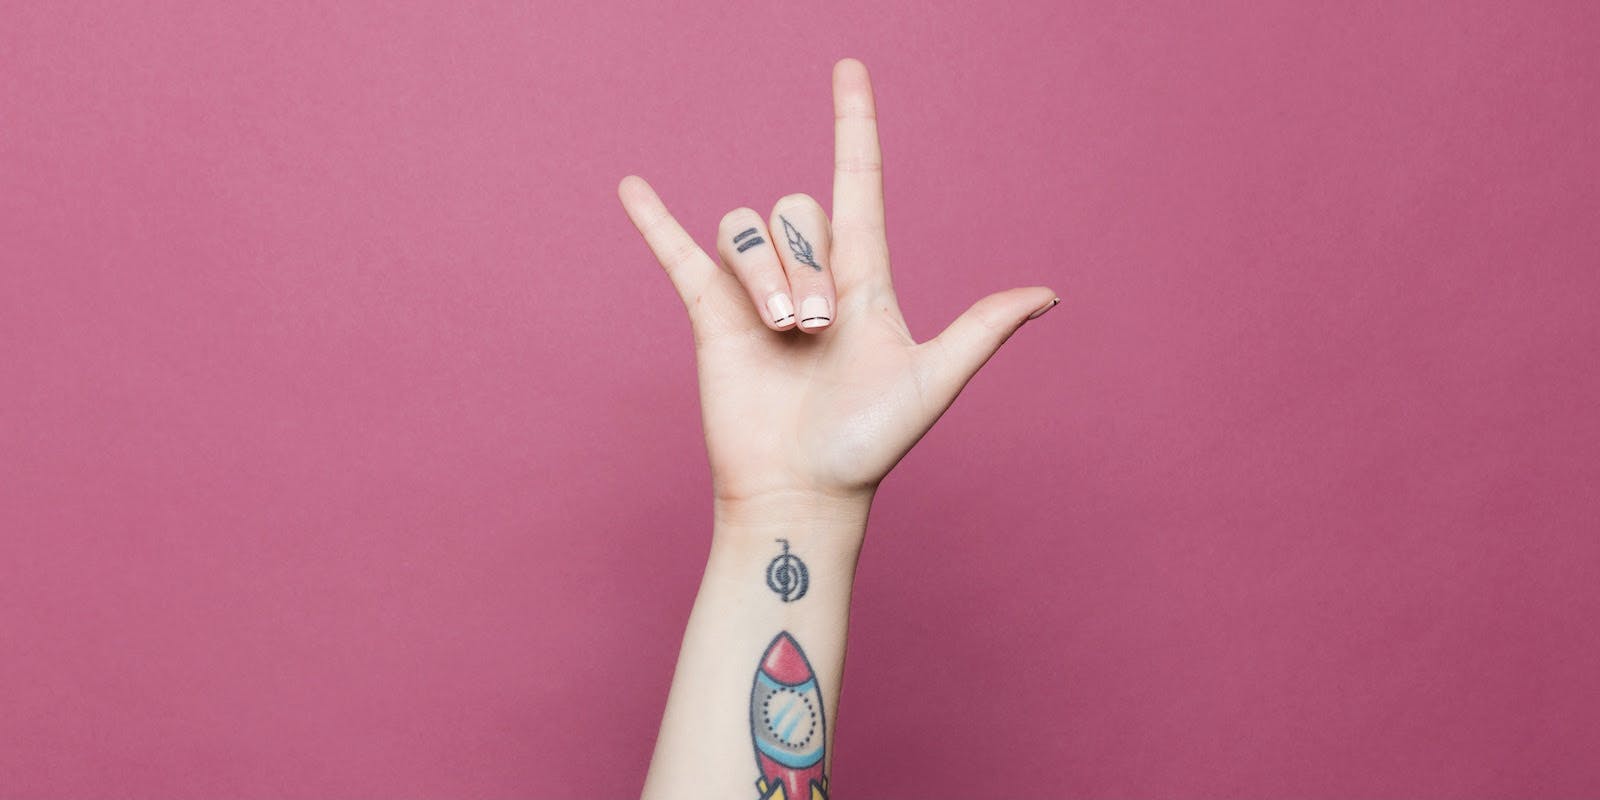 A tattooed forearm reaches up against a bright pink background with a hand spelling "I love you" in sign language.